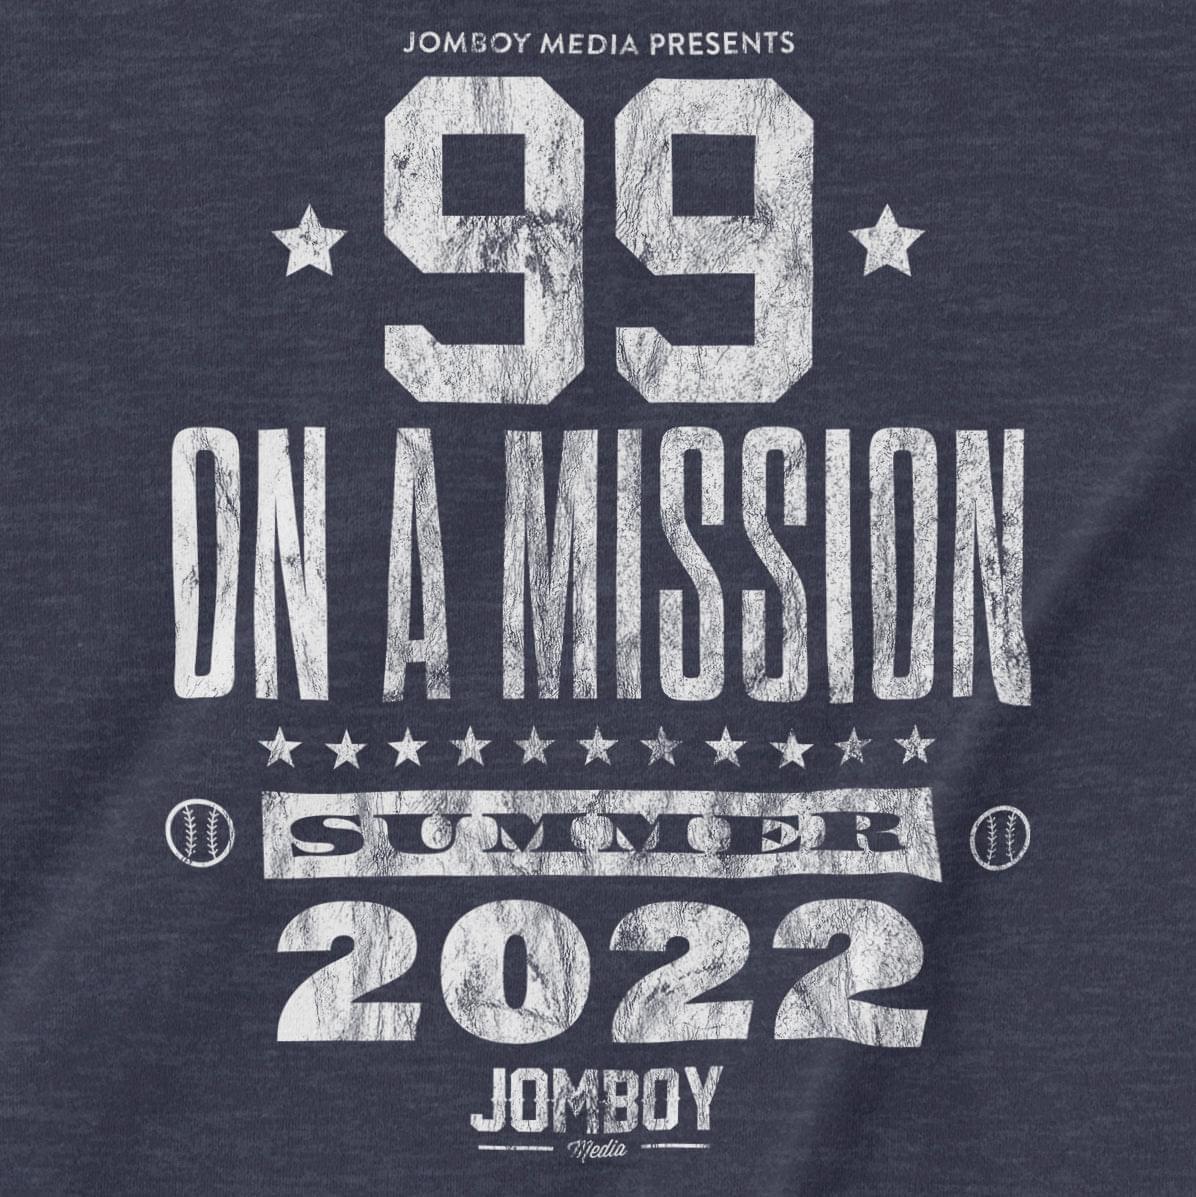 #99 On a Mission | T-Shirt